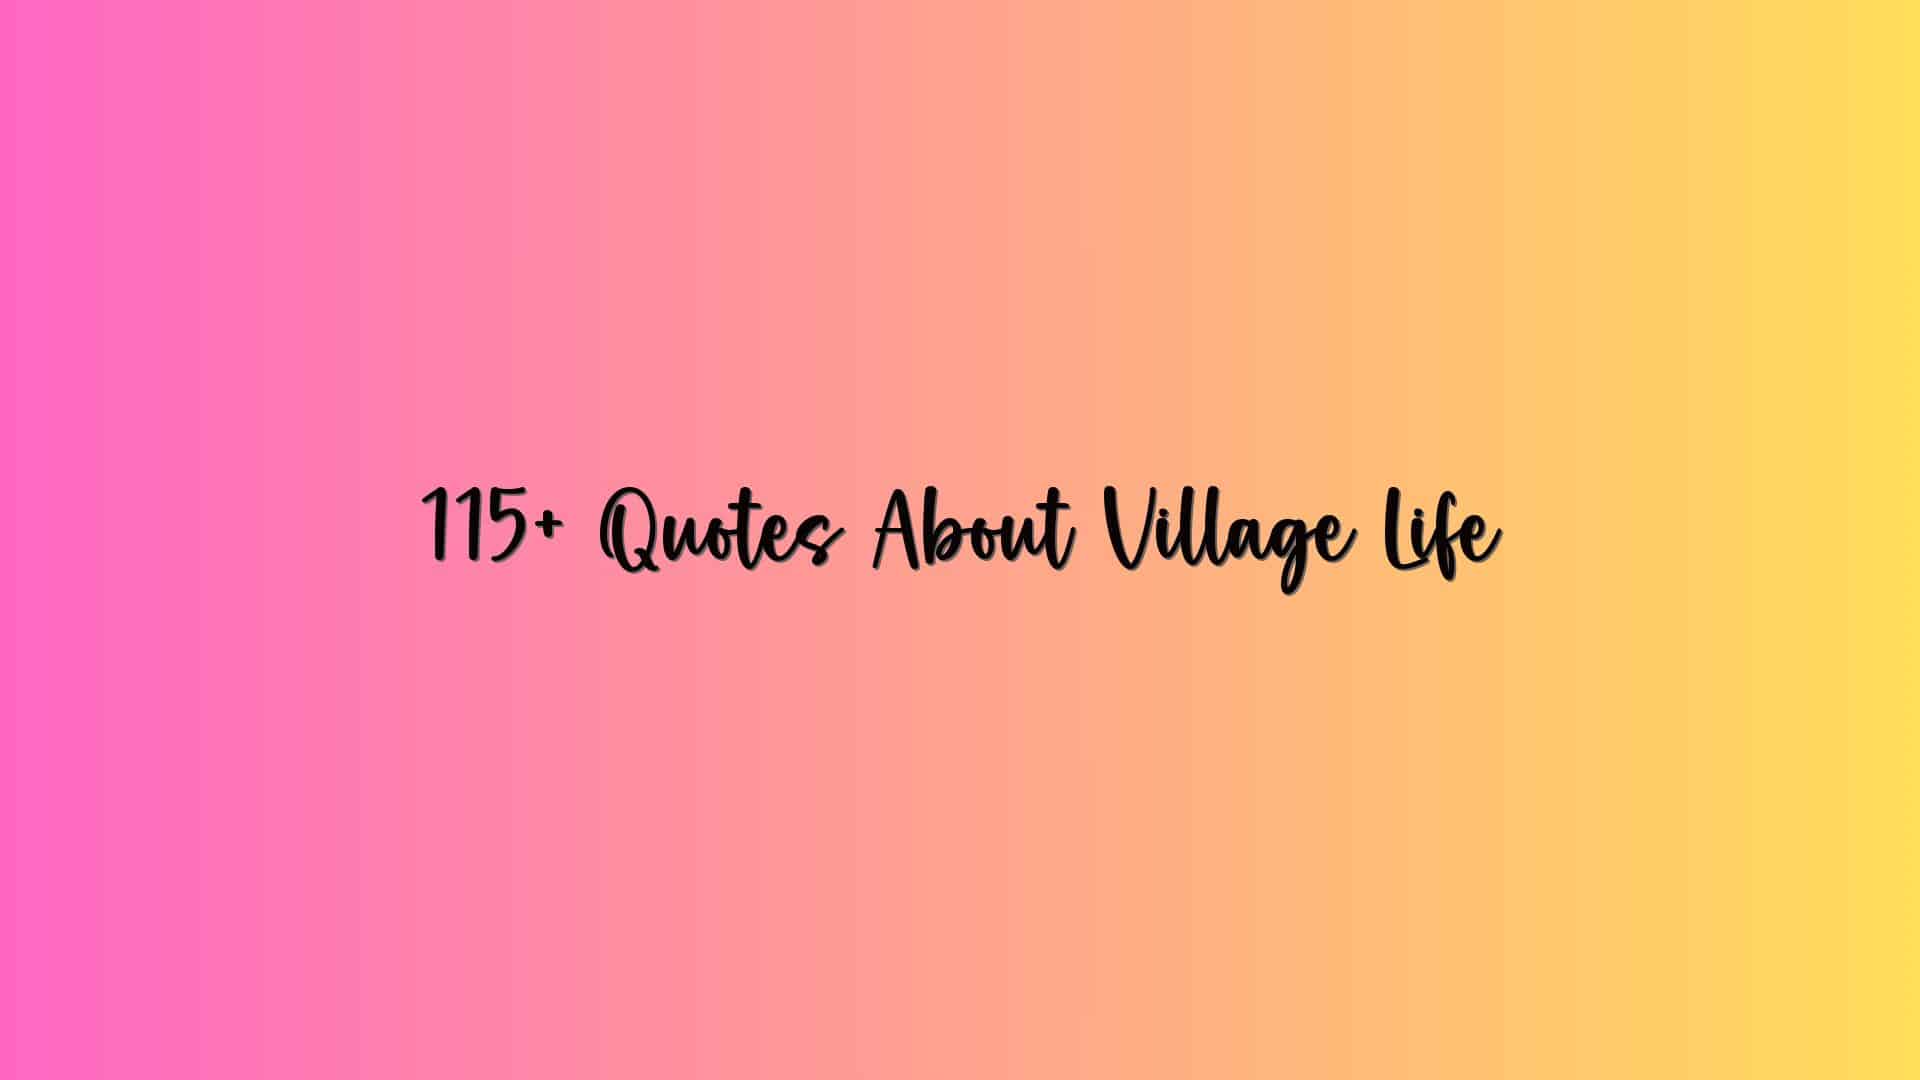 115+ Quotes About Village Life